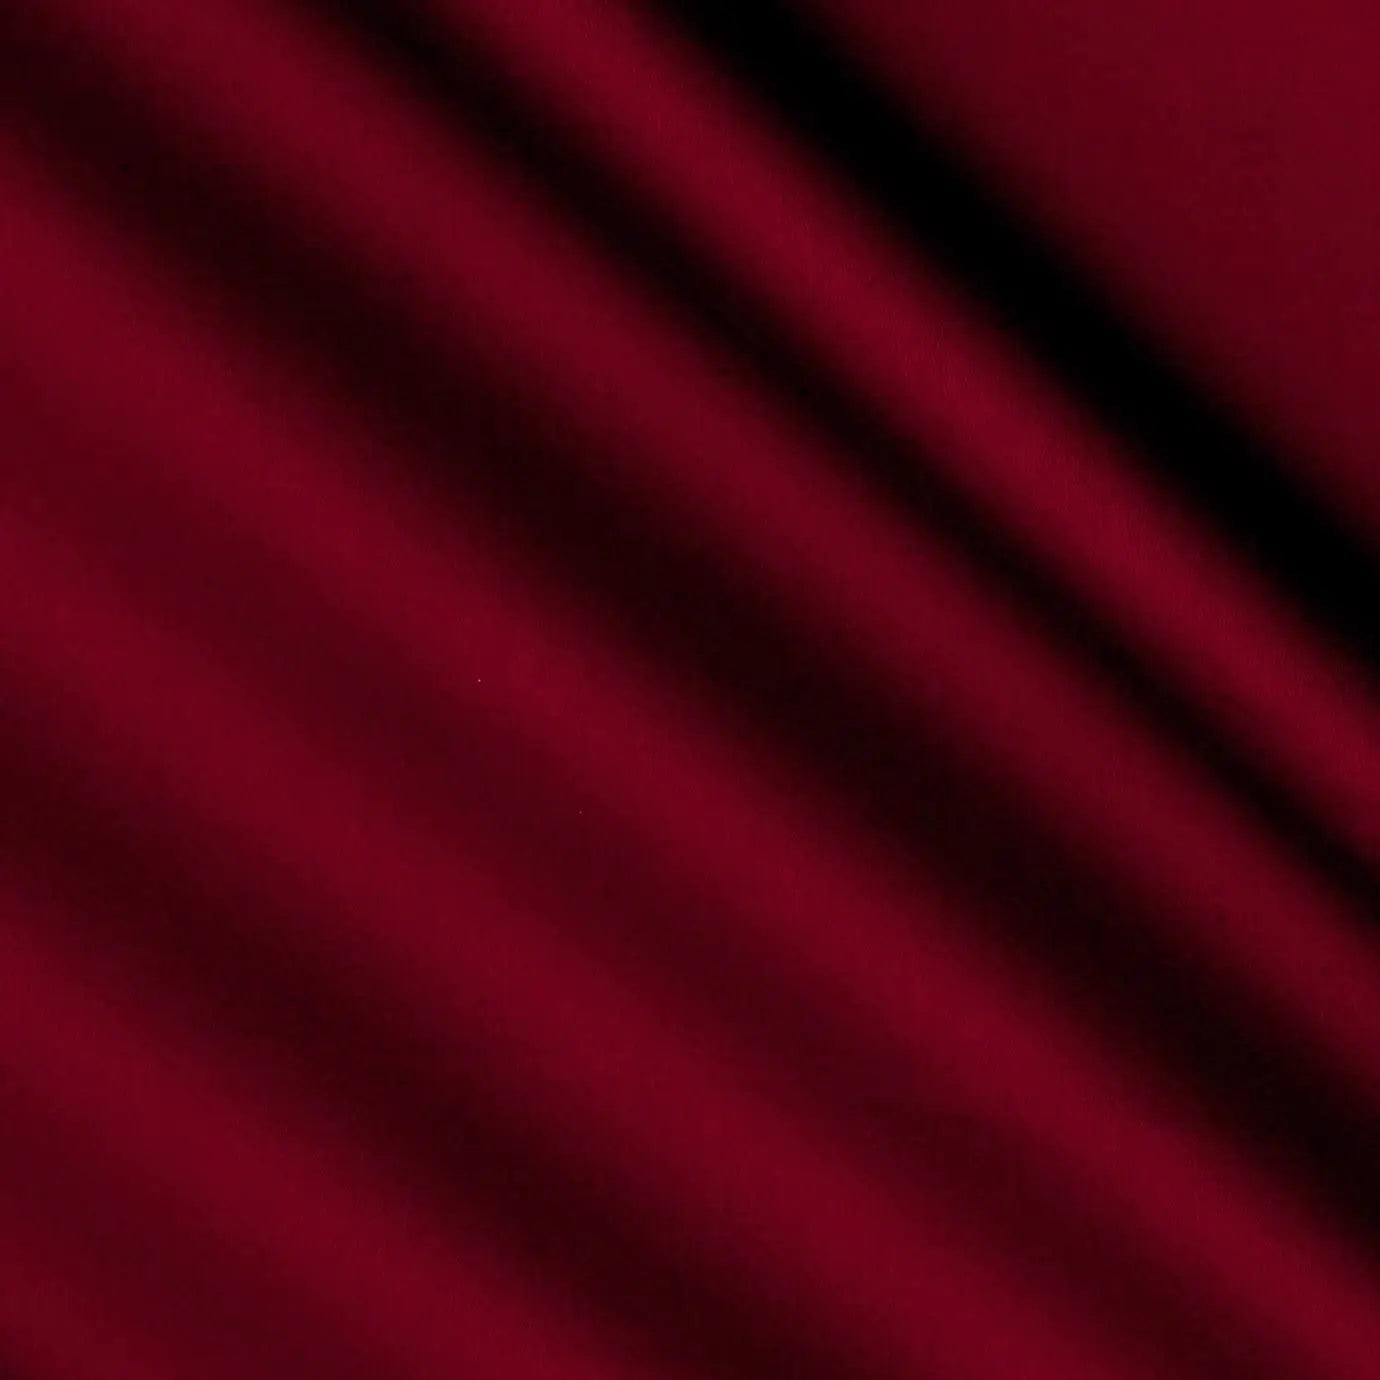 Red Burgundy Cotton Sateen Wideback Fabric per yard - Linda's Electric Quilters